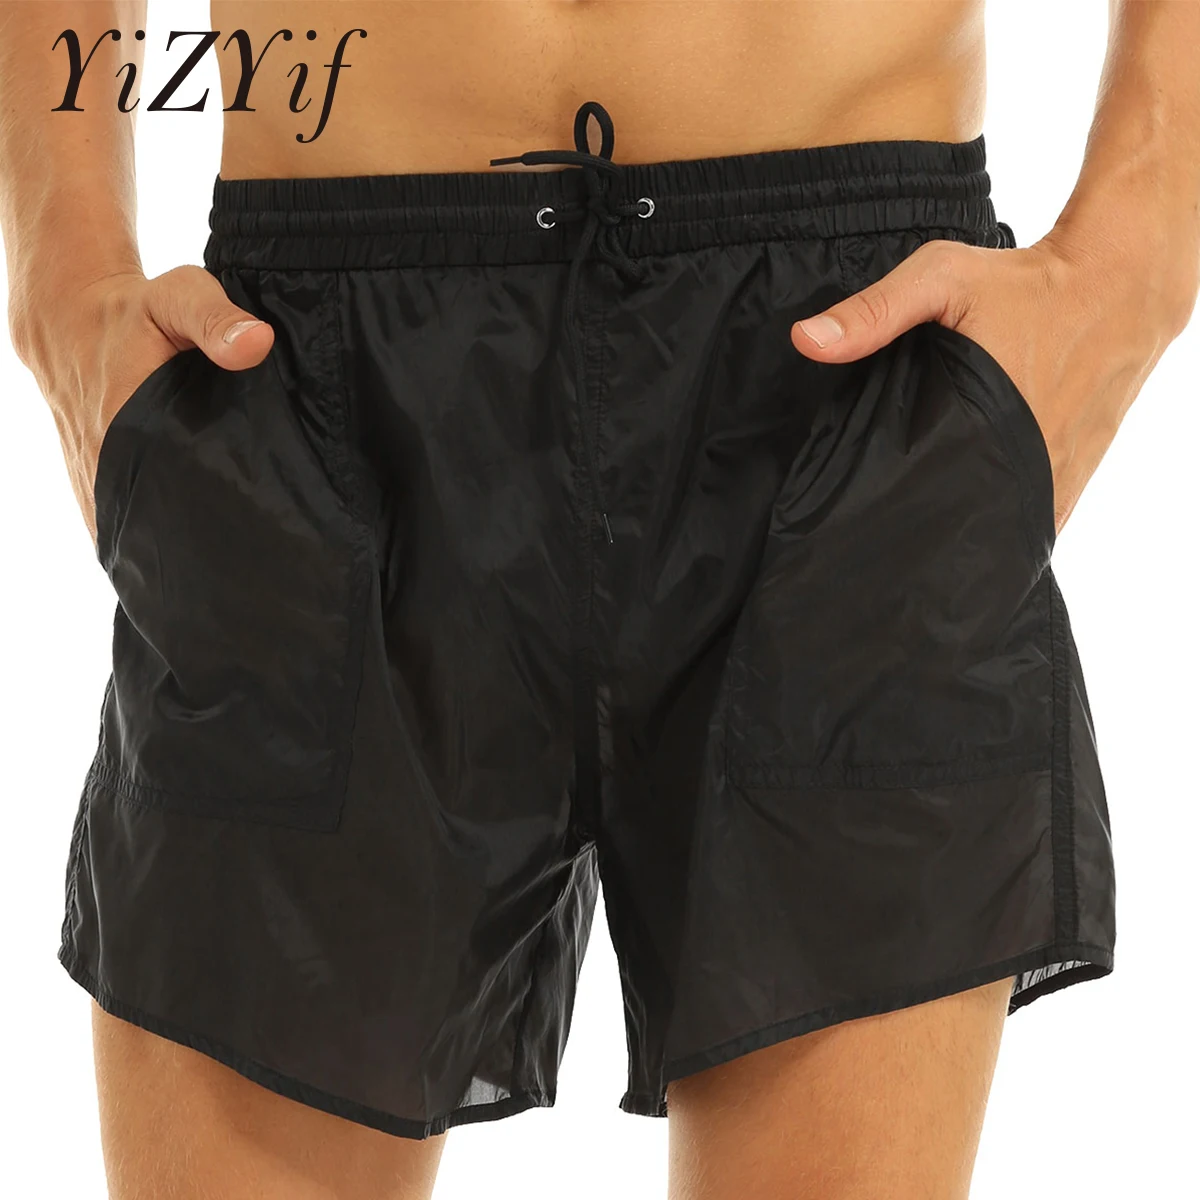 Transparent Swimwear Mens Swim Shorts Sexy Solid Drawstring Quick Dry Beach Shorts Man Swimming Trunks with Bulit-in Mesh Briefs